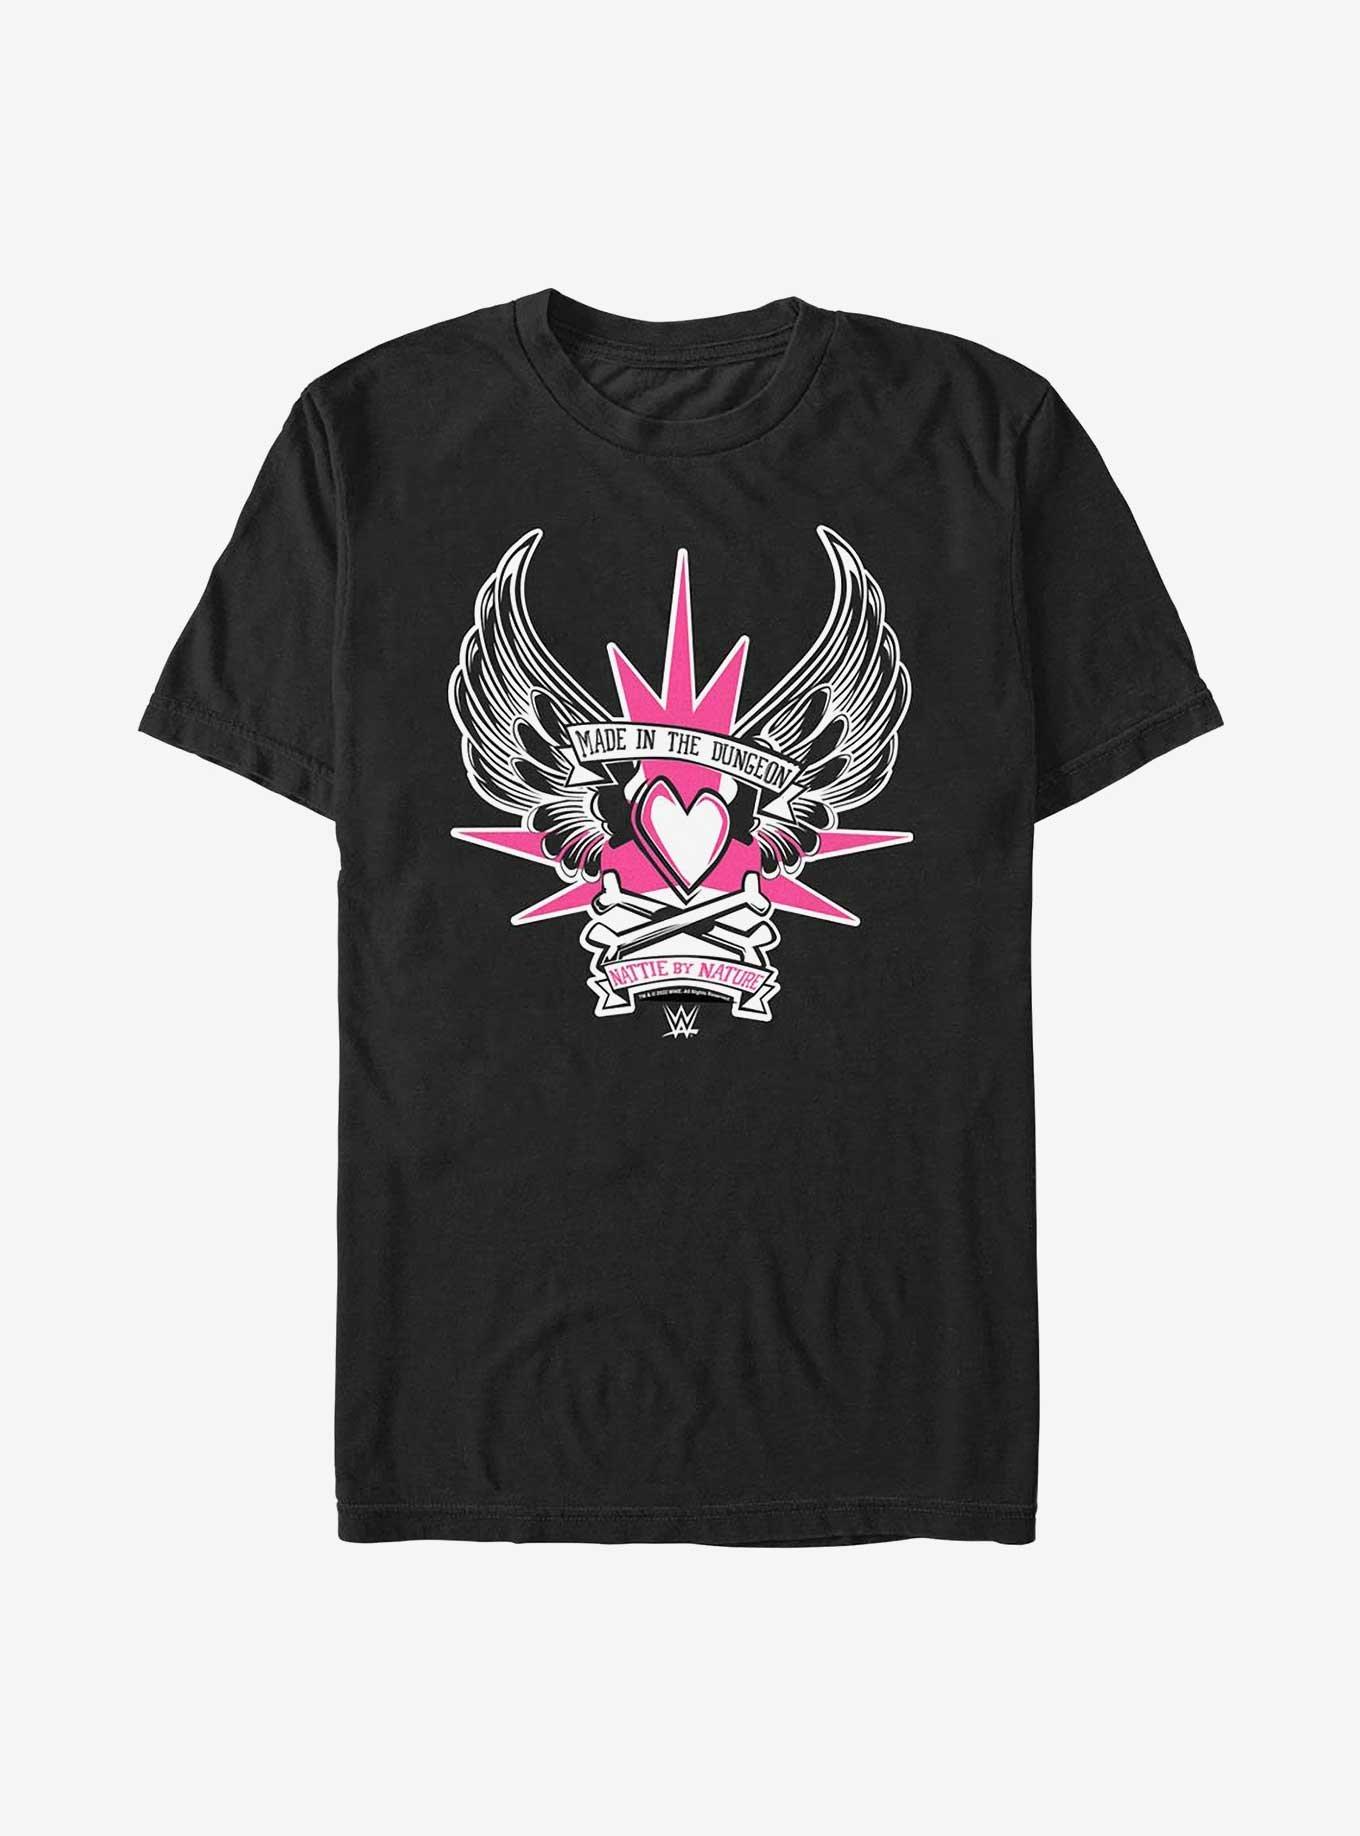 WWE Natalya Nattie By Nature Made In The Dungeon T-Shirt, BLACK, hi-res